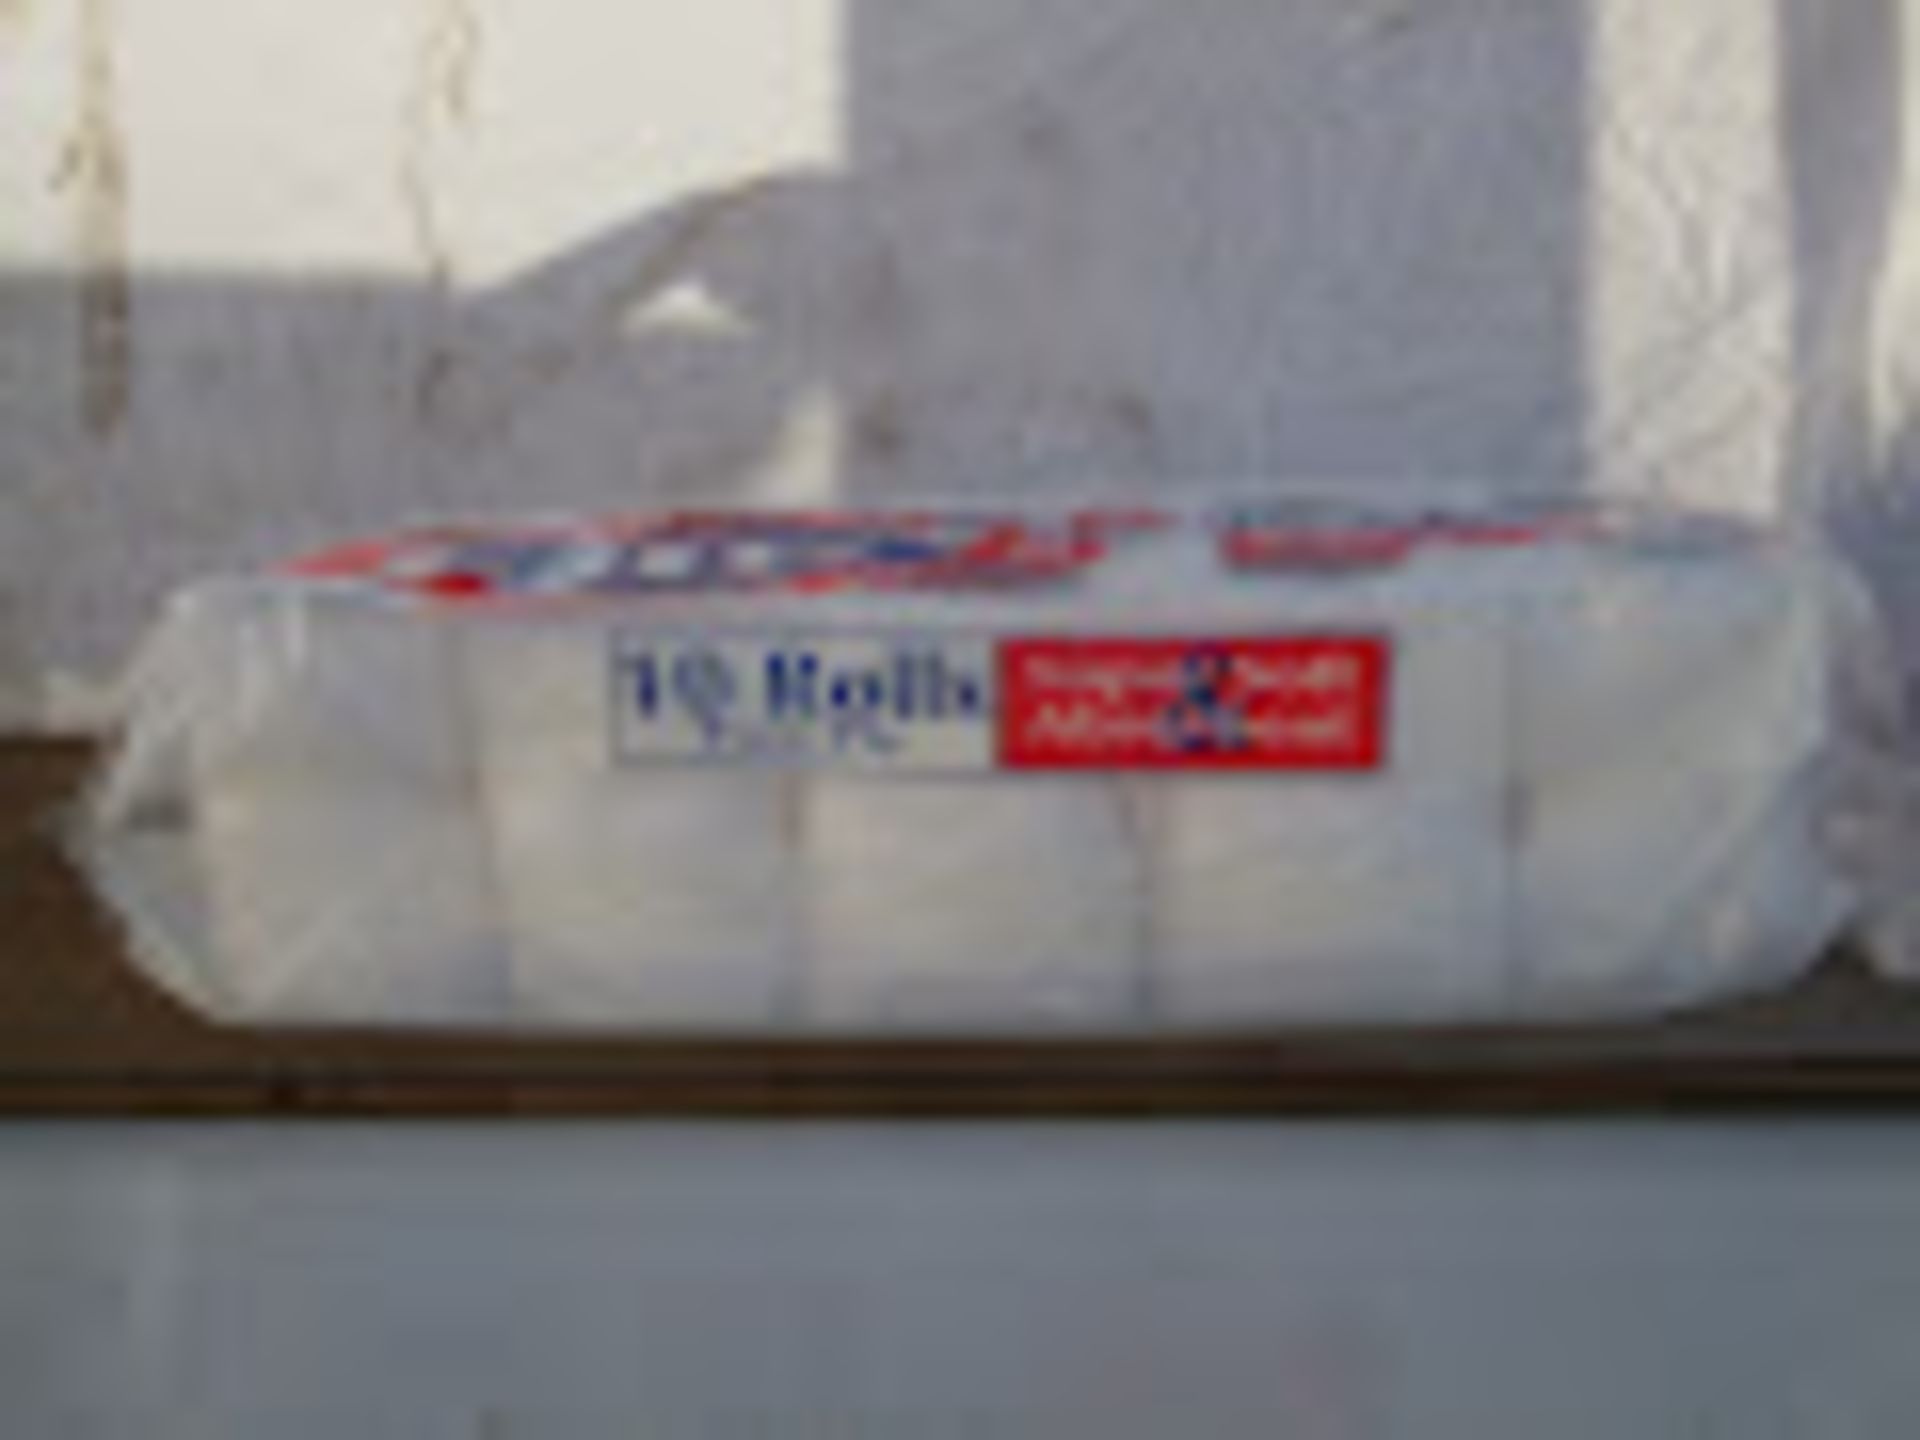 1 PALLET OF 2000 SUPERSOFT AND ABSORBENT TOILET ROLLS, IN PACKS OF 10, 20 CASES PER PALLET *PLUS VAT - Image 3 of 3